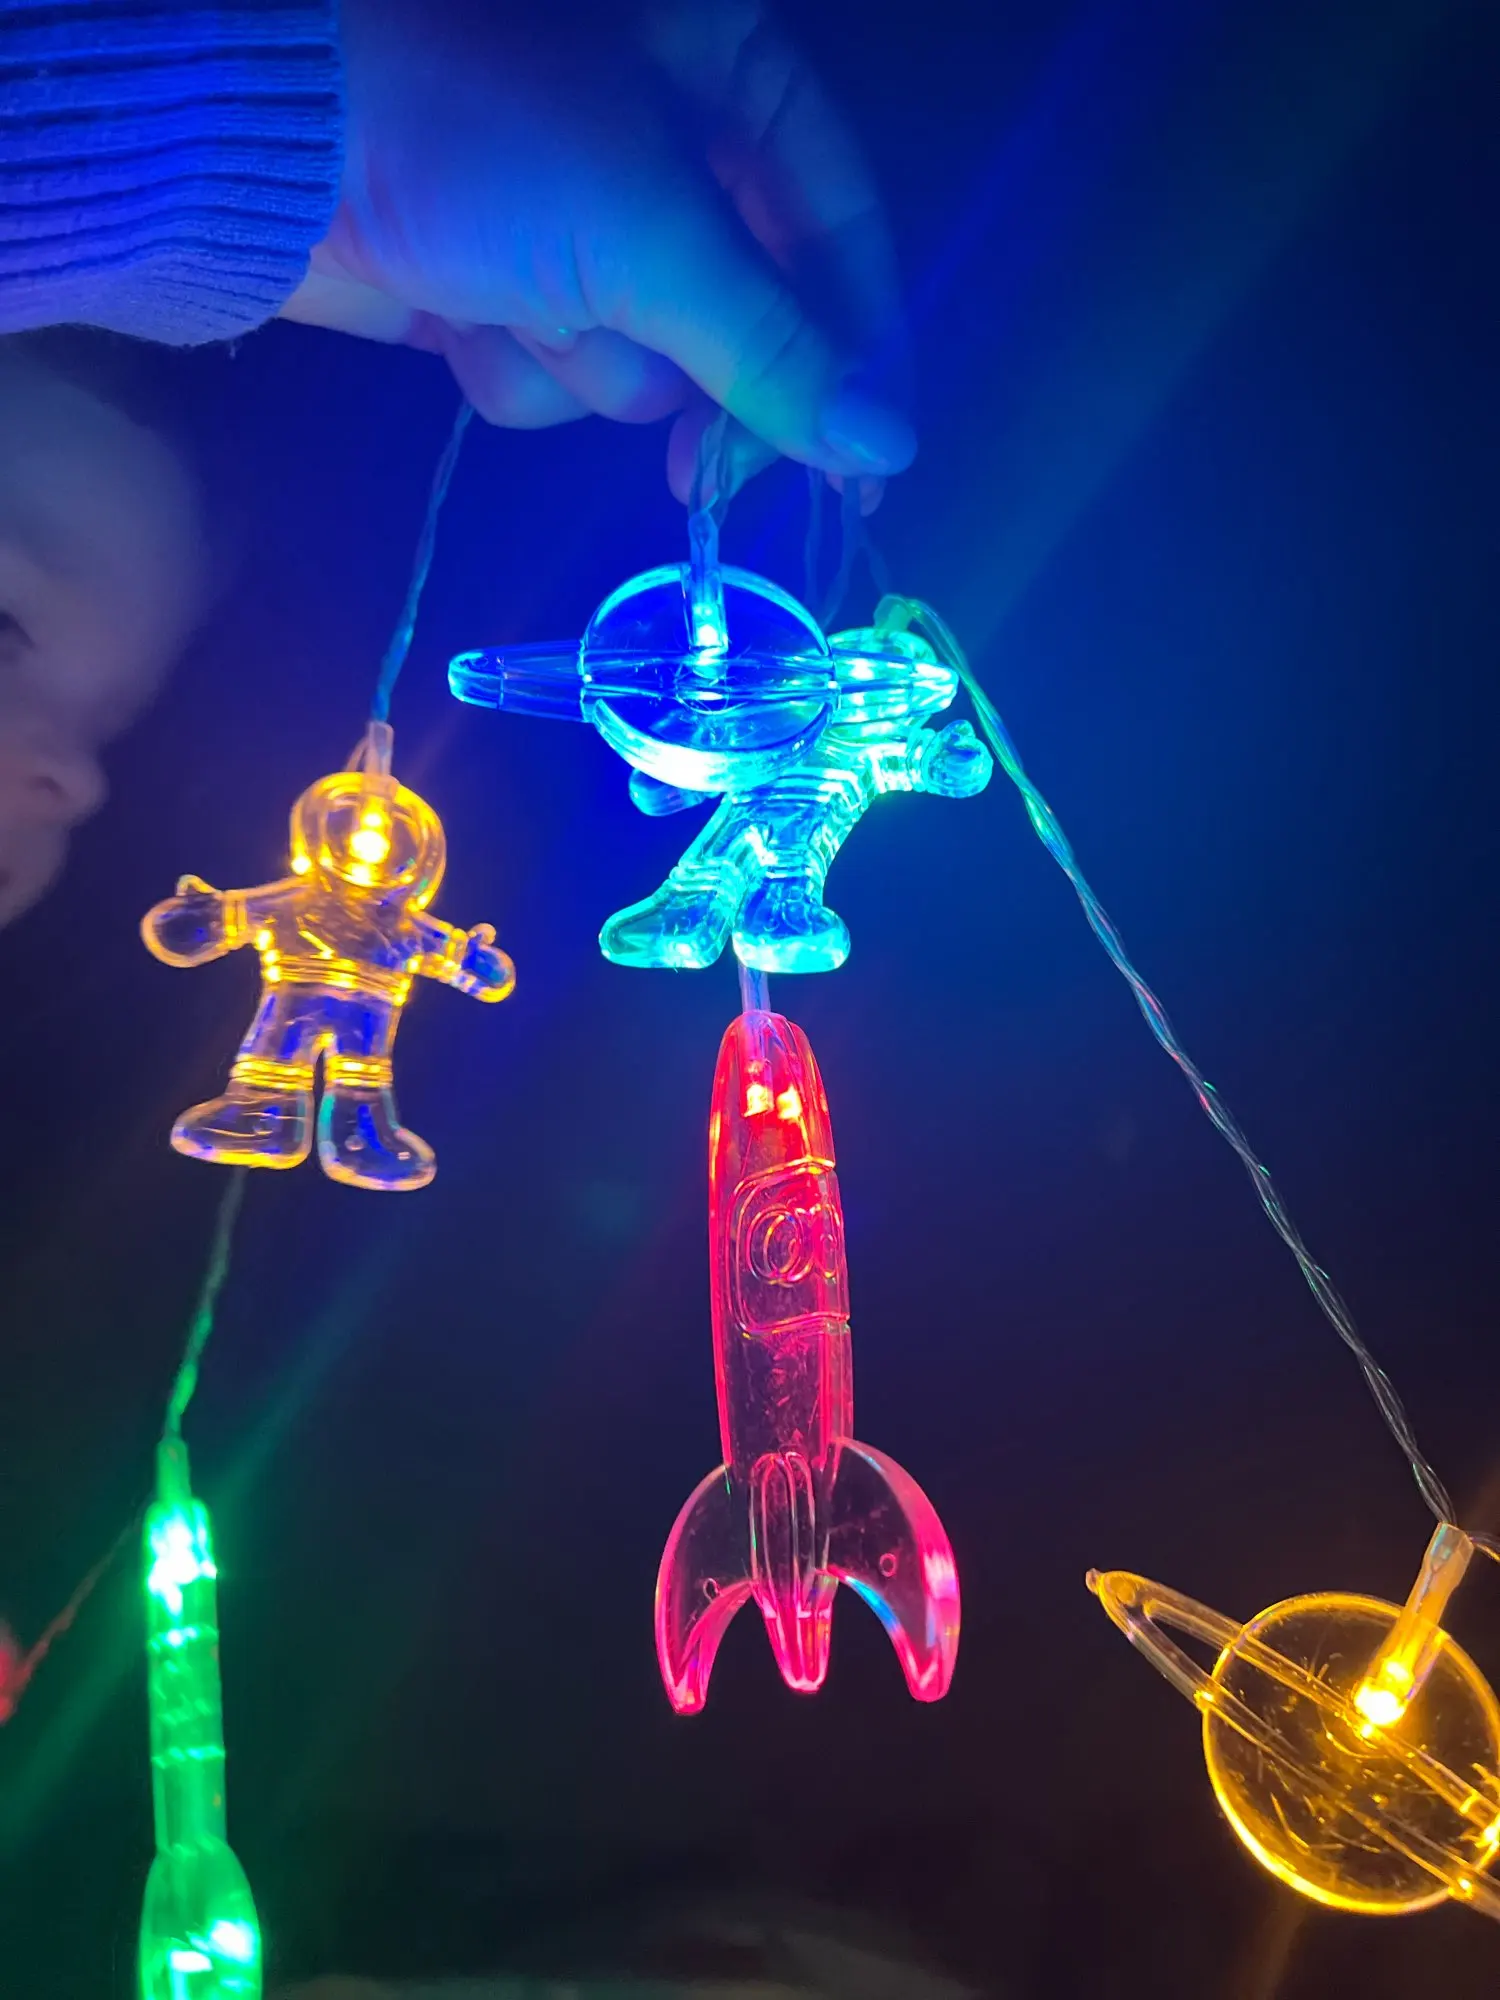 Astronaut themed string light with rocket and space motifs10